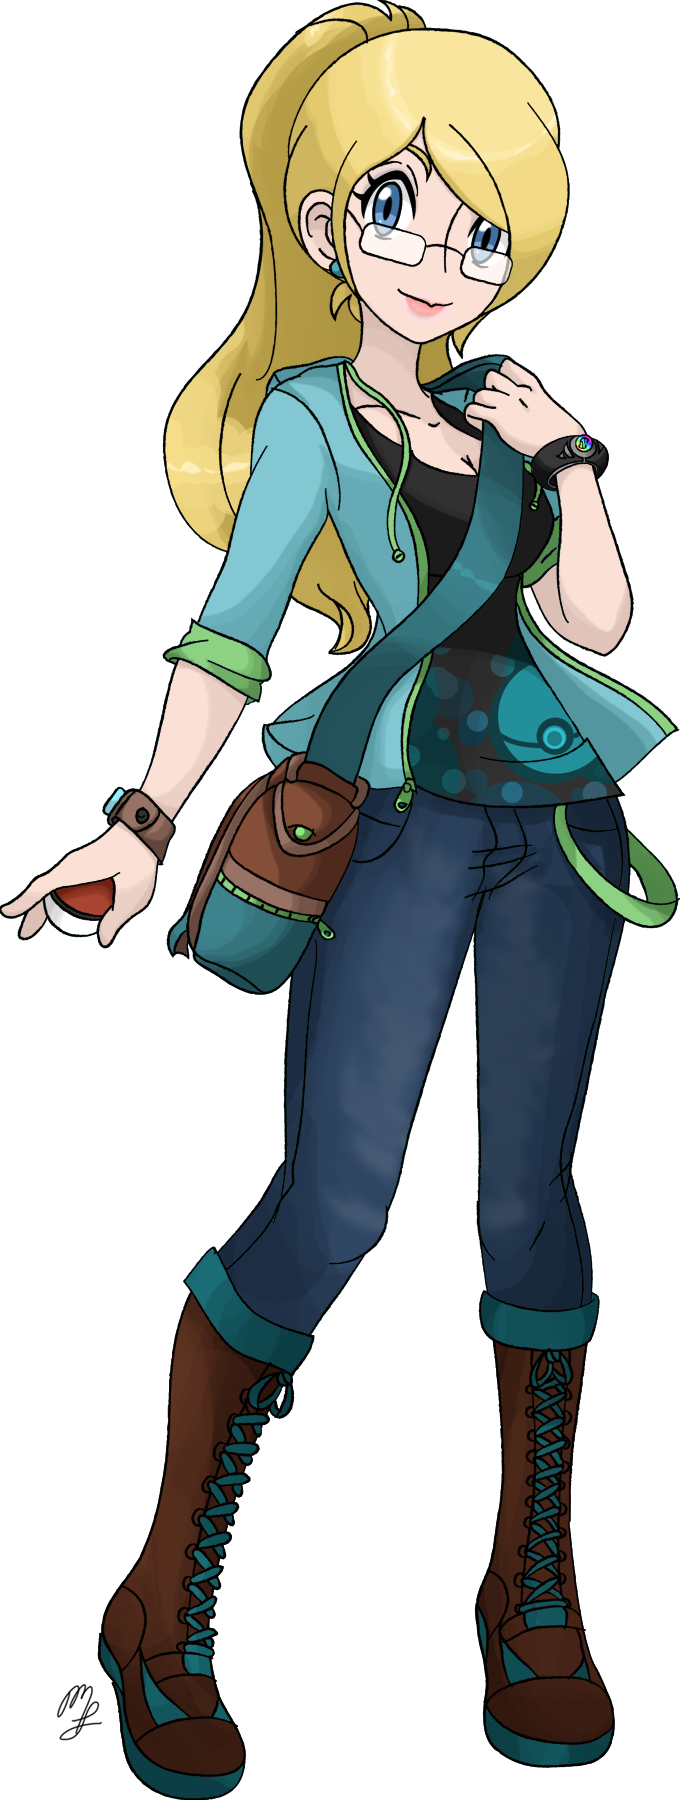 azami___pokemon_trainer_oc_by_yukidemon-d6s2oby.png